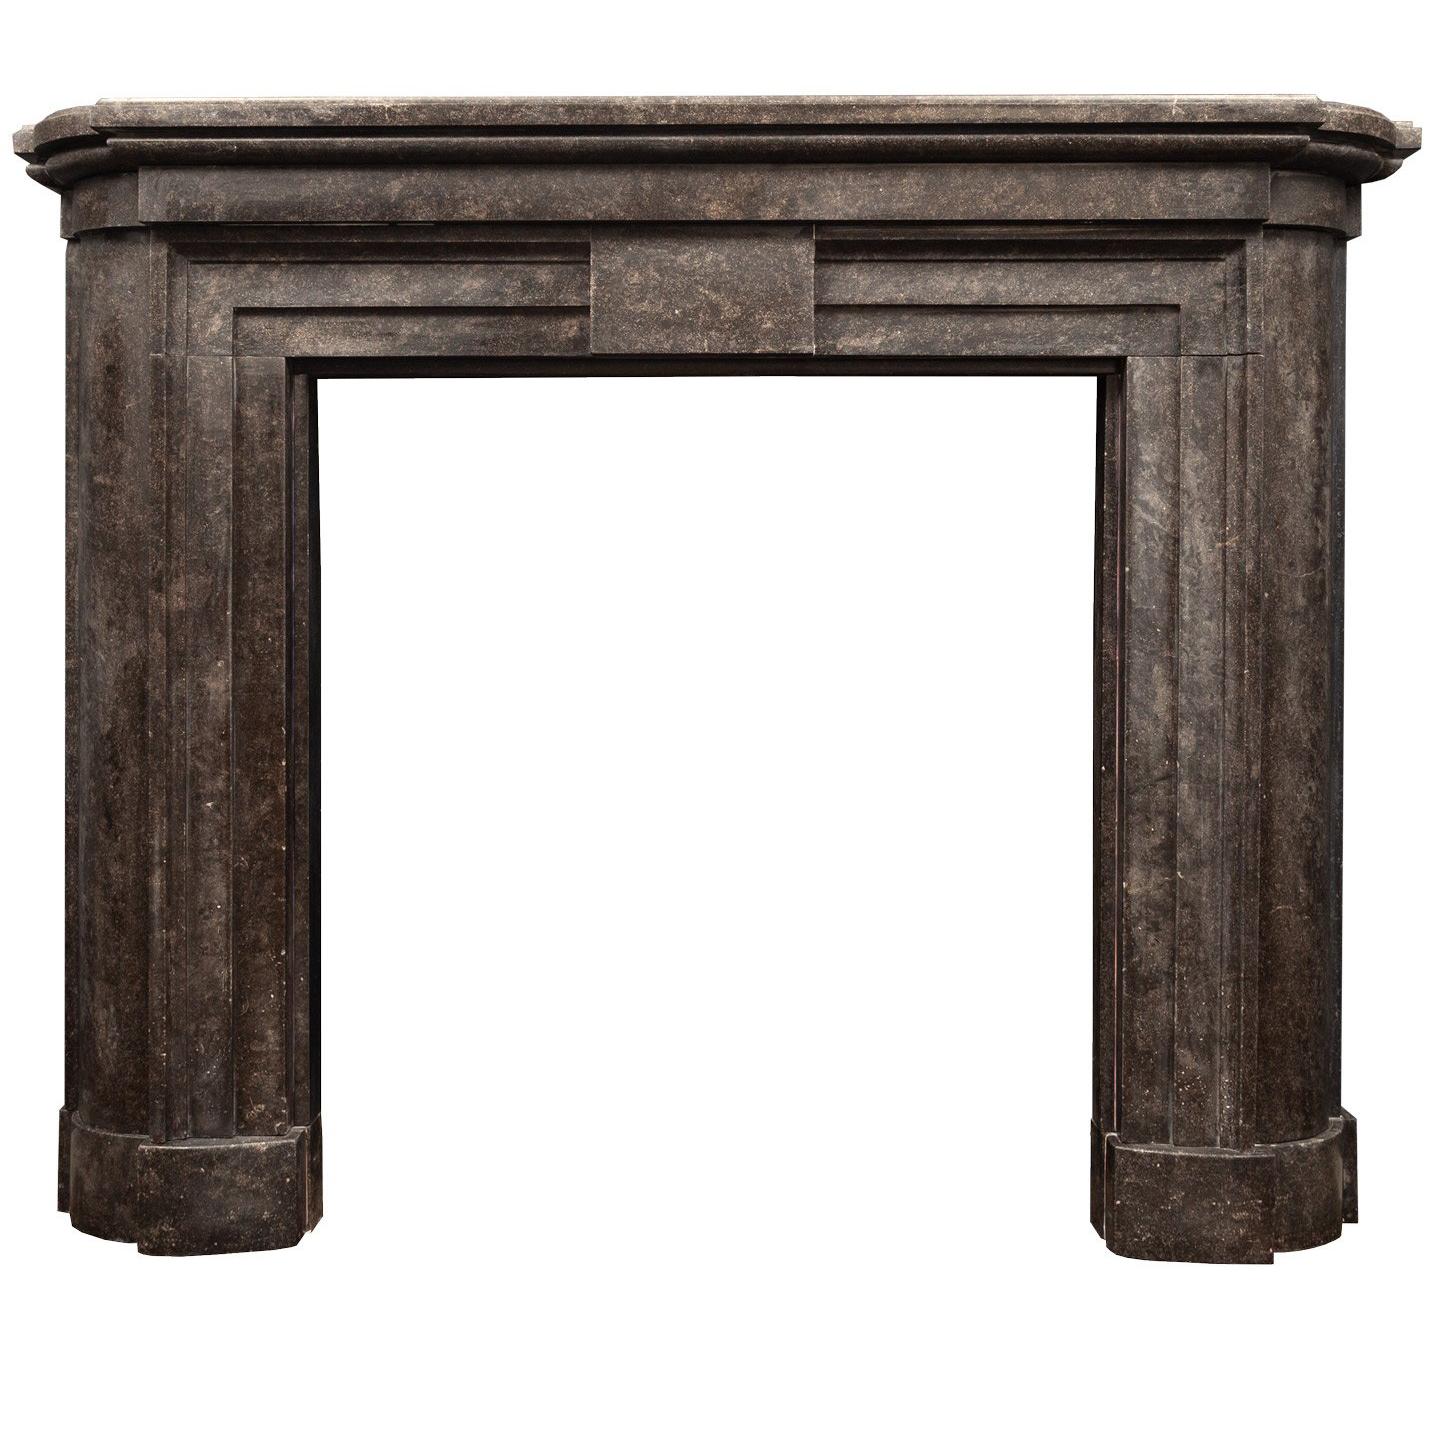 Antique Kilkenny Marble Fireplace